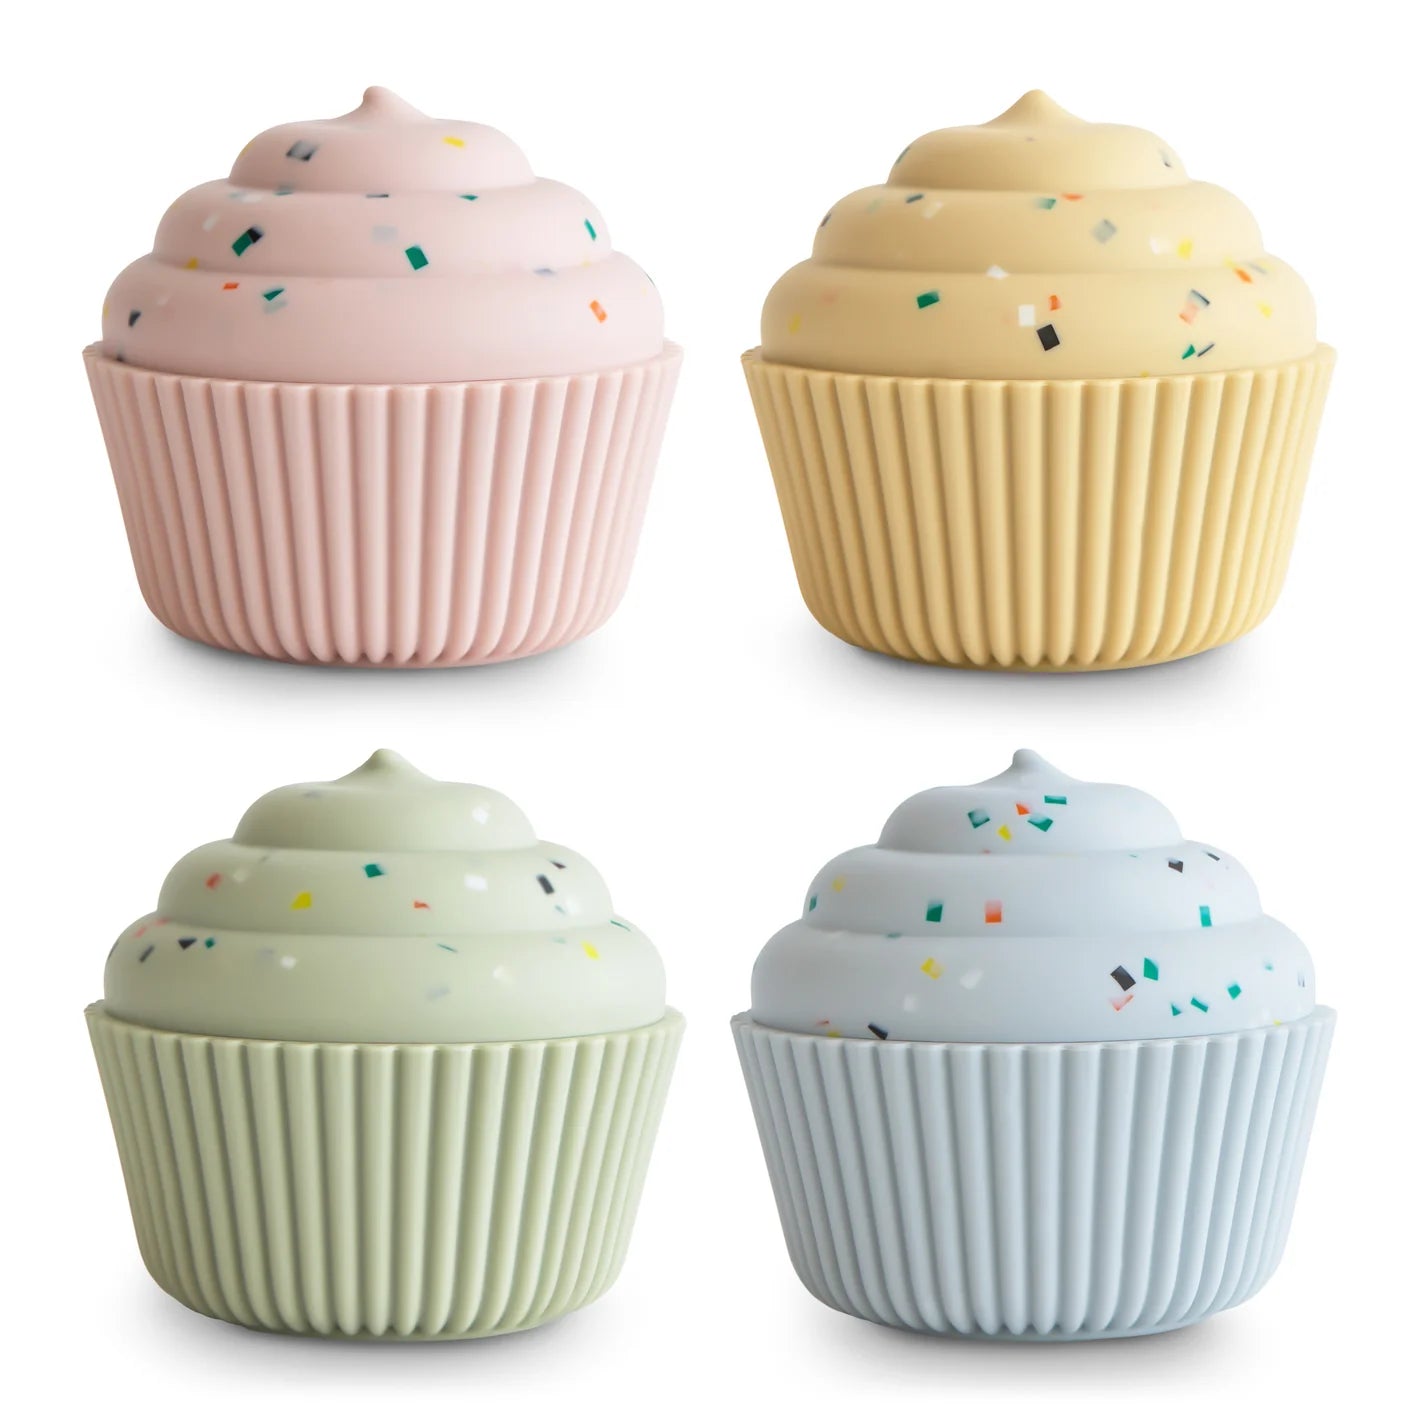 Mix and Match Cupcake Toy - Twinkle Twinkle Little One